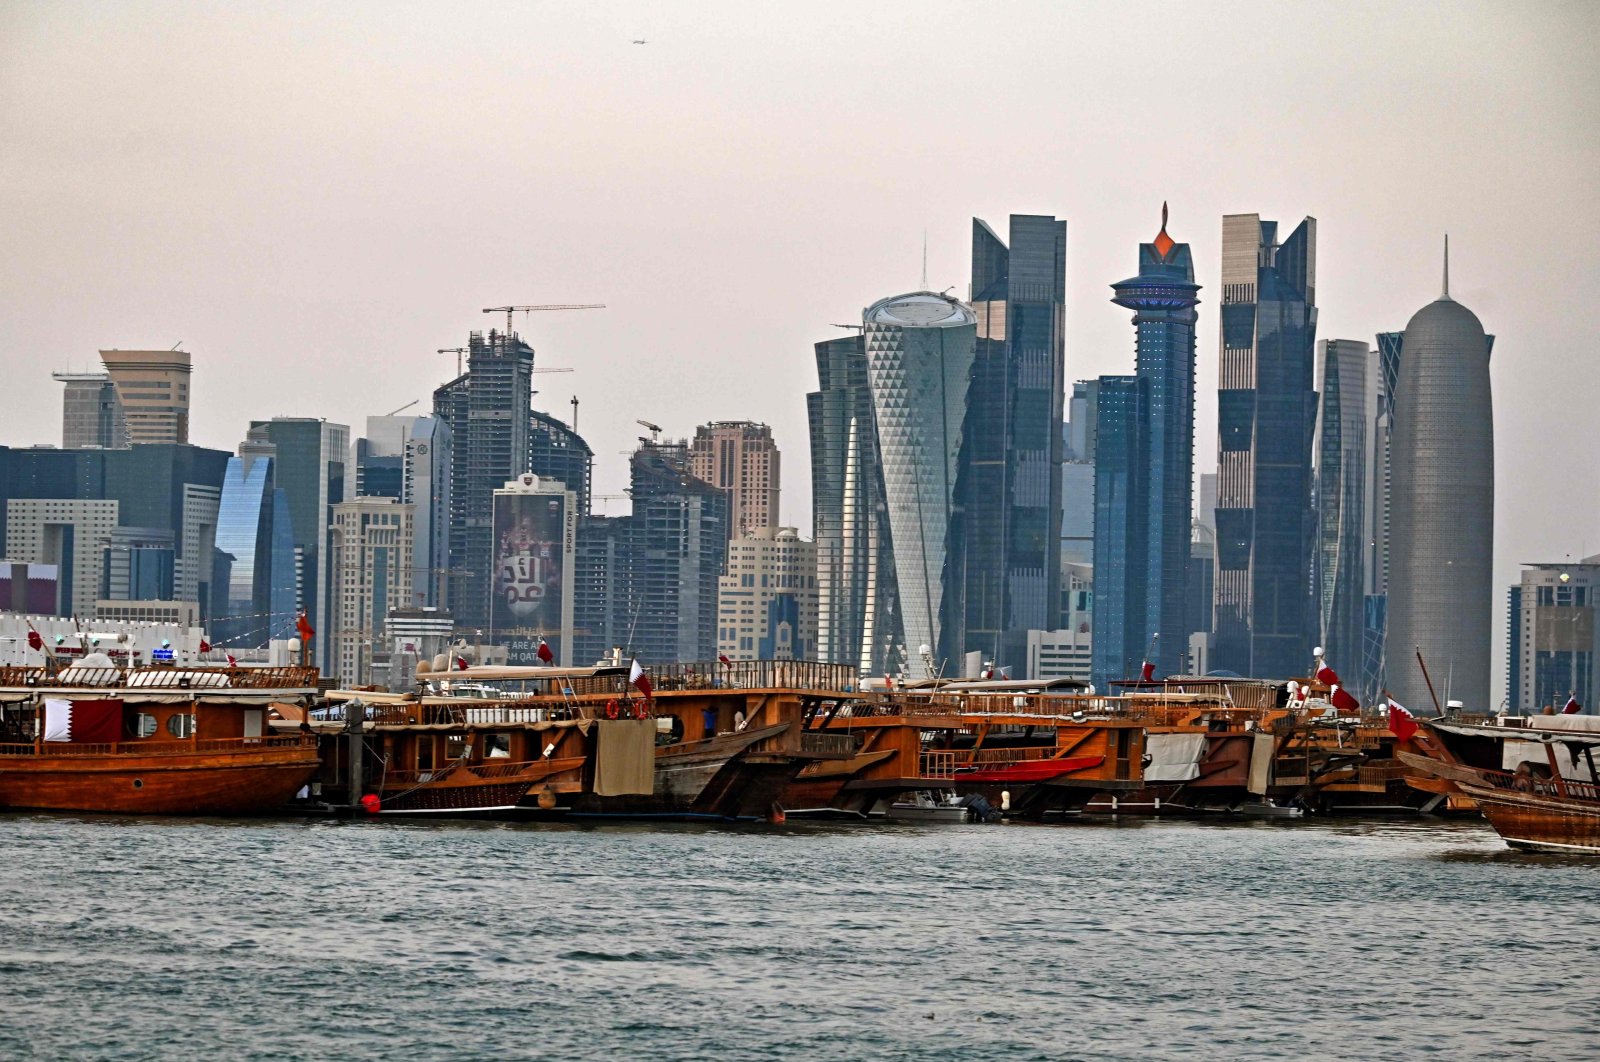 This file photo taken on Dec. 20, 2019, shows a view of boats moored in front of high-rise buildings in the Qatari capital, Doha. (AFP Photo)